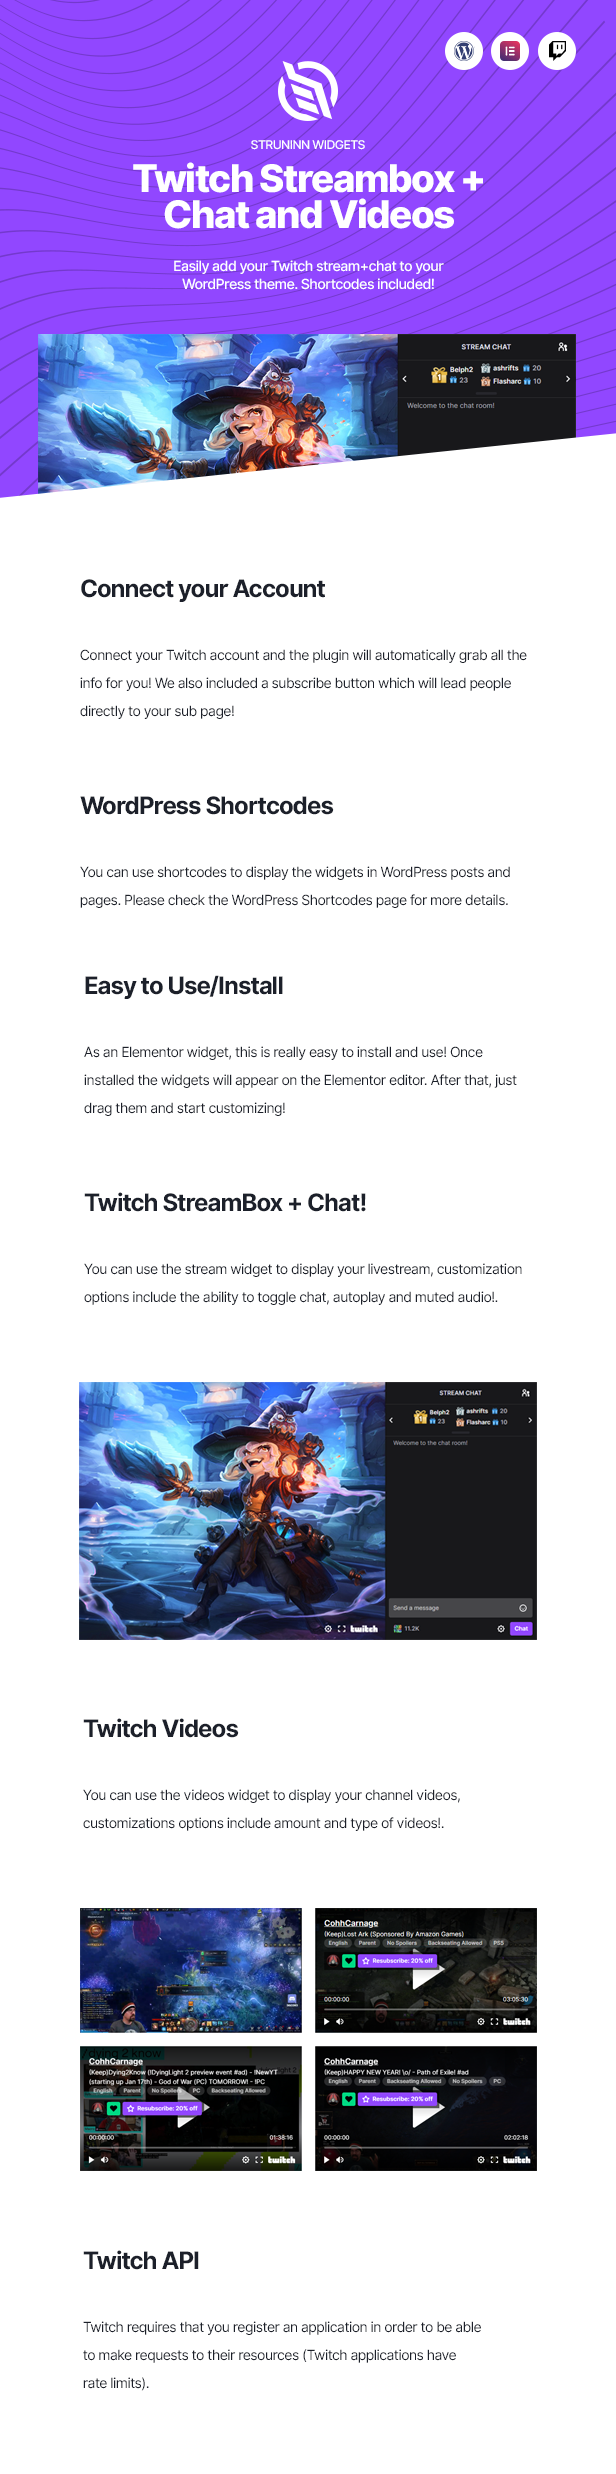 Struninn - Twitch Streambox with Chat and Videos - 7